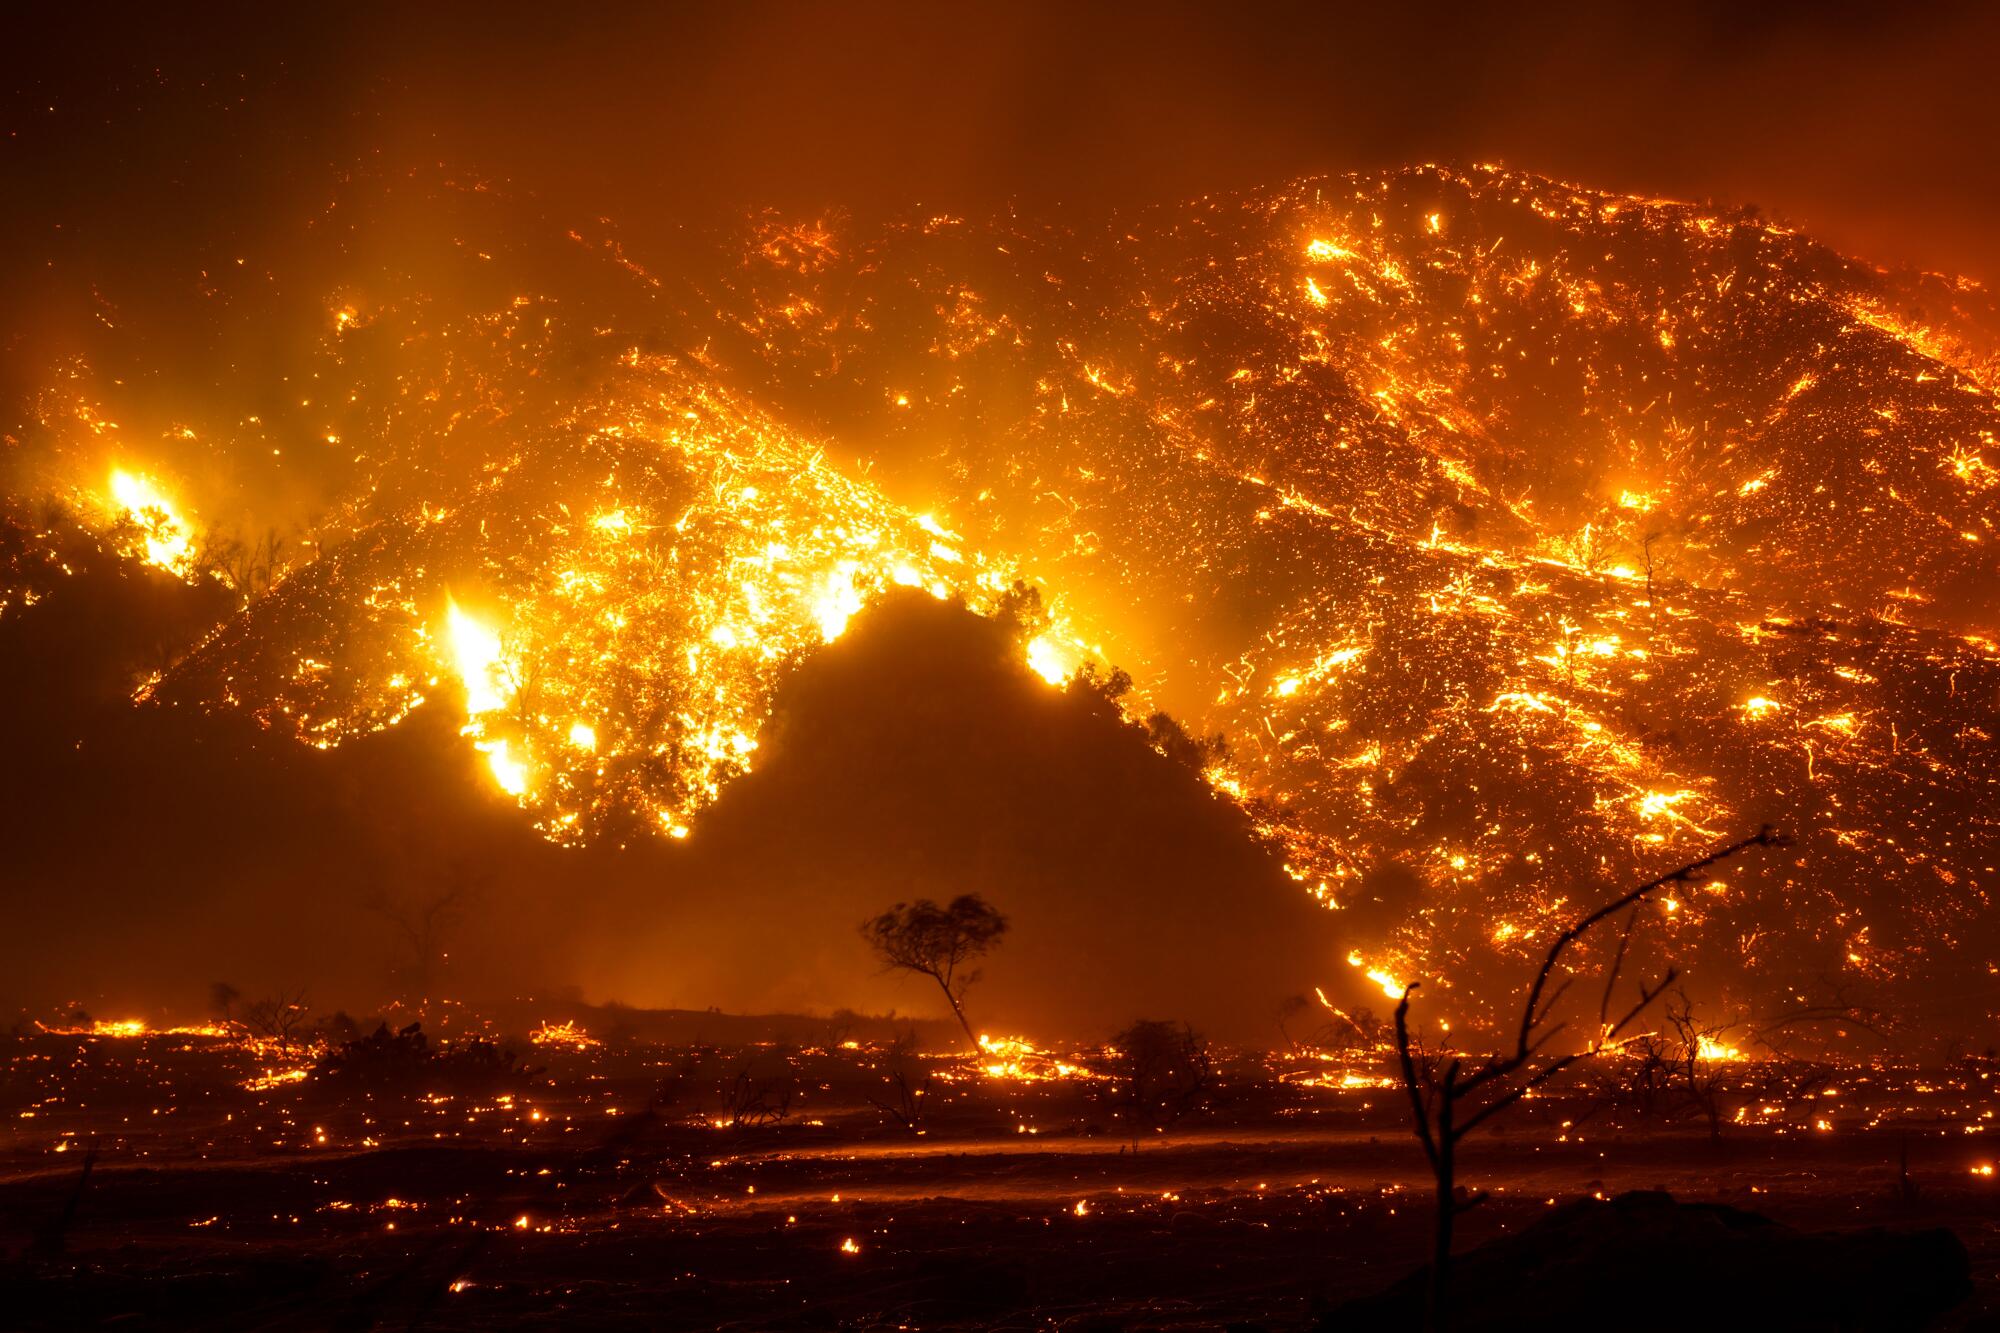 A hillside covered in flames and glowing orange embers at night